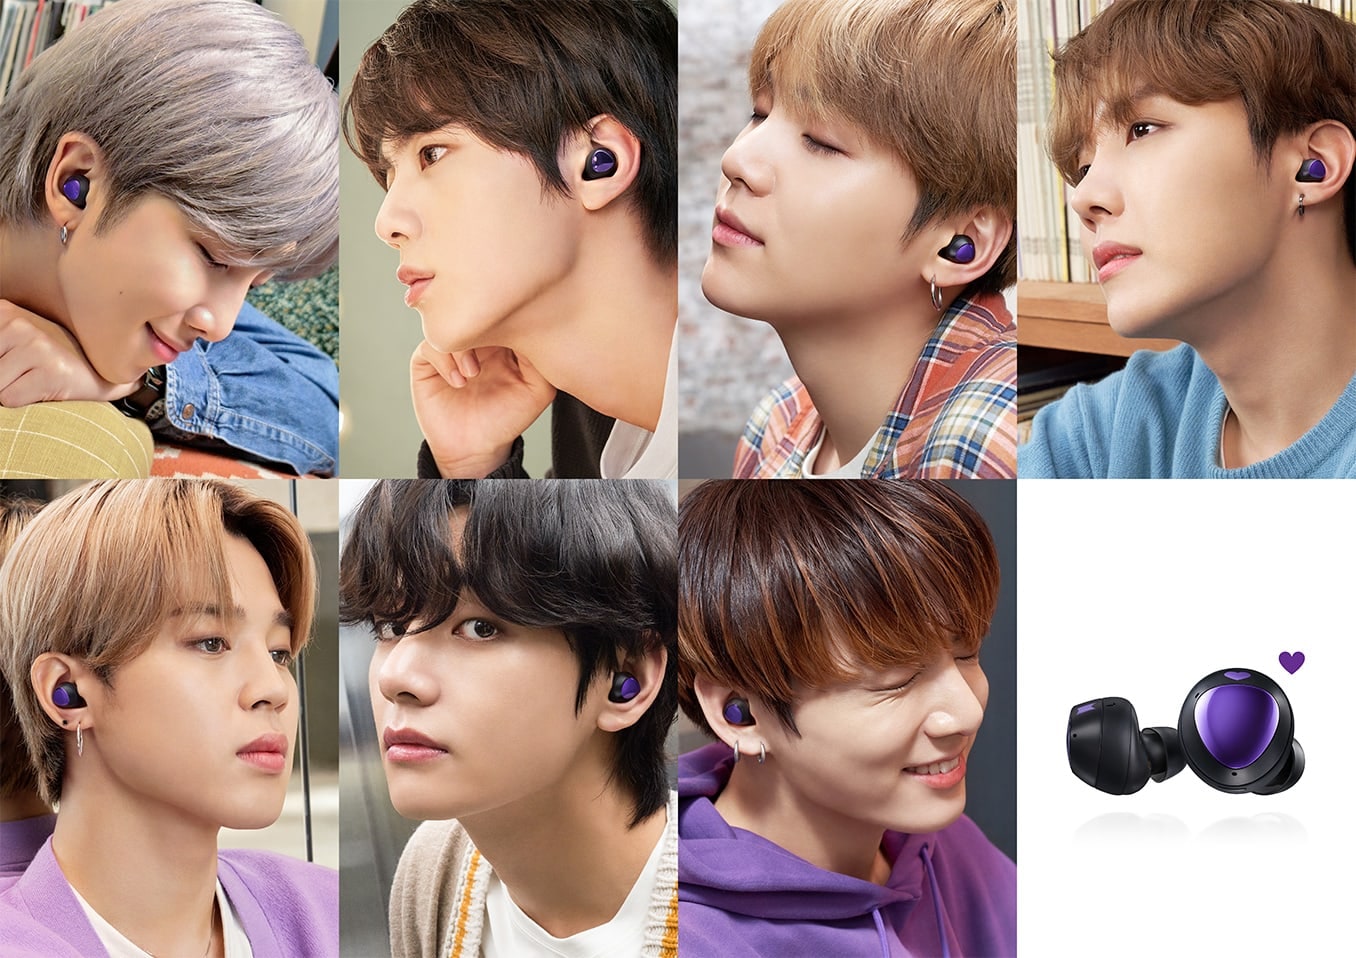 A photo grid featuring pictures of each member of BTS wearing the Galaxy Buds plus BTS Edition. Another picture in the grid shows the Galaxy Buds plus BTS edition against a white background, with a purple heart off to the side.